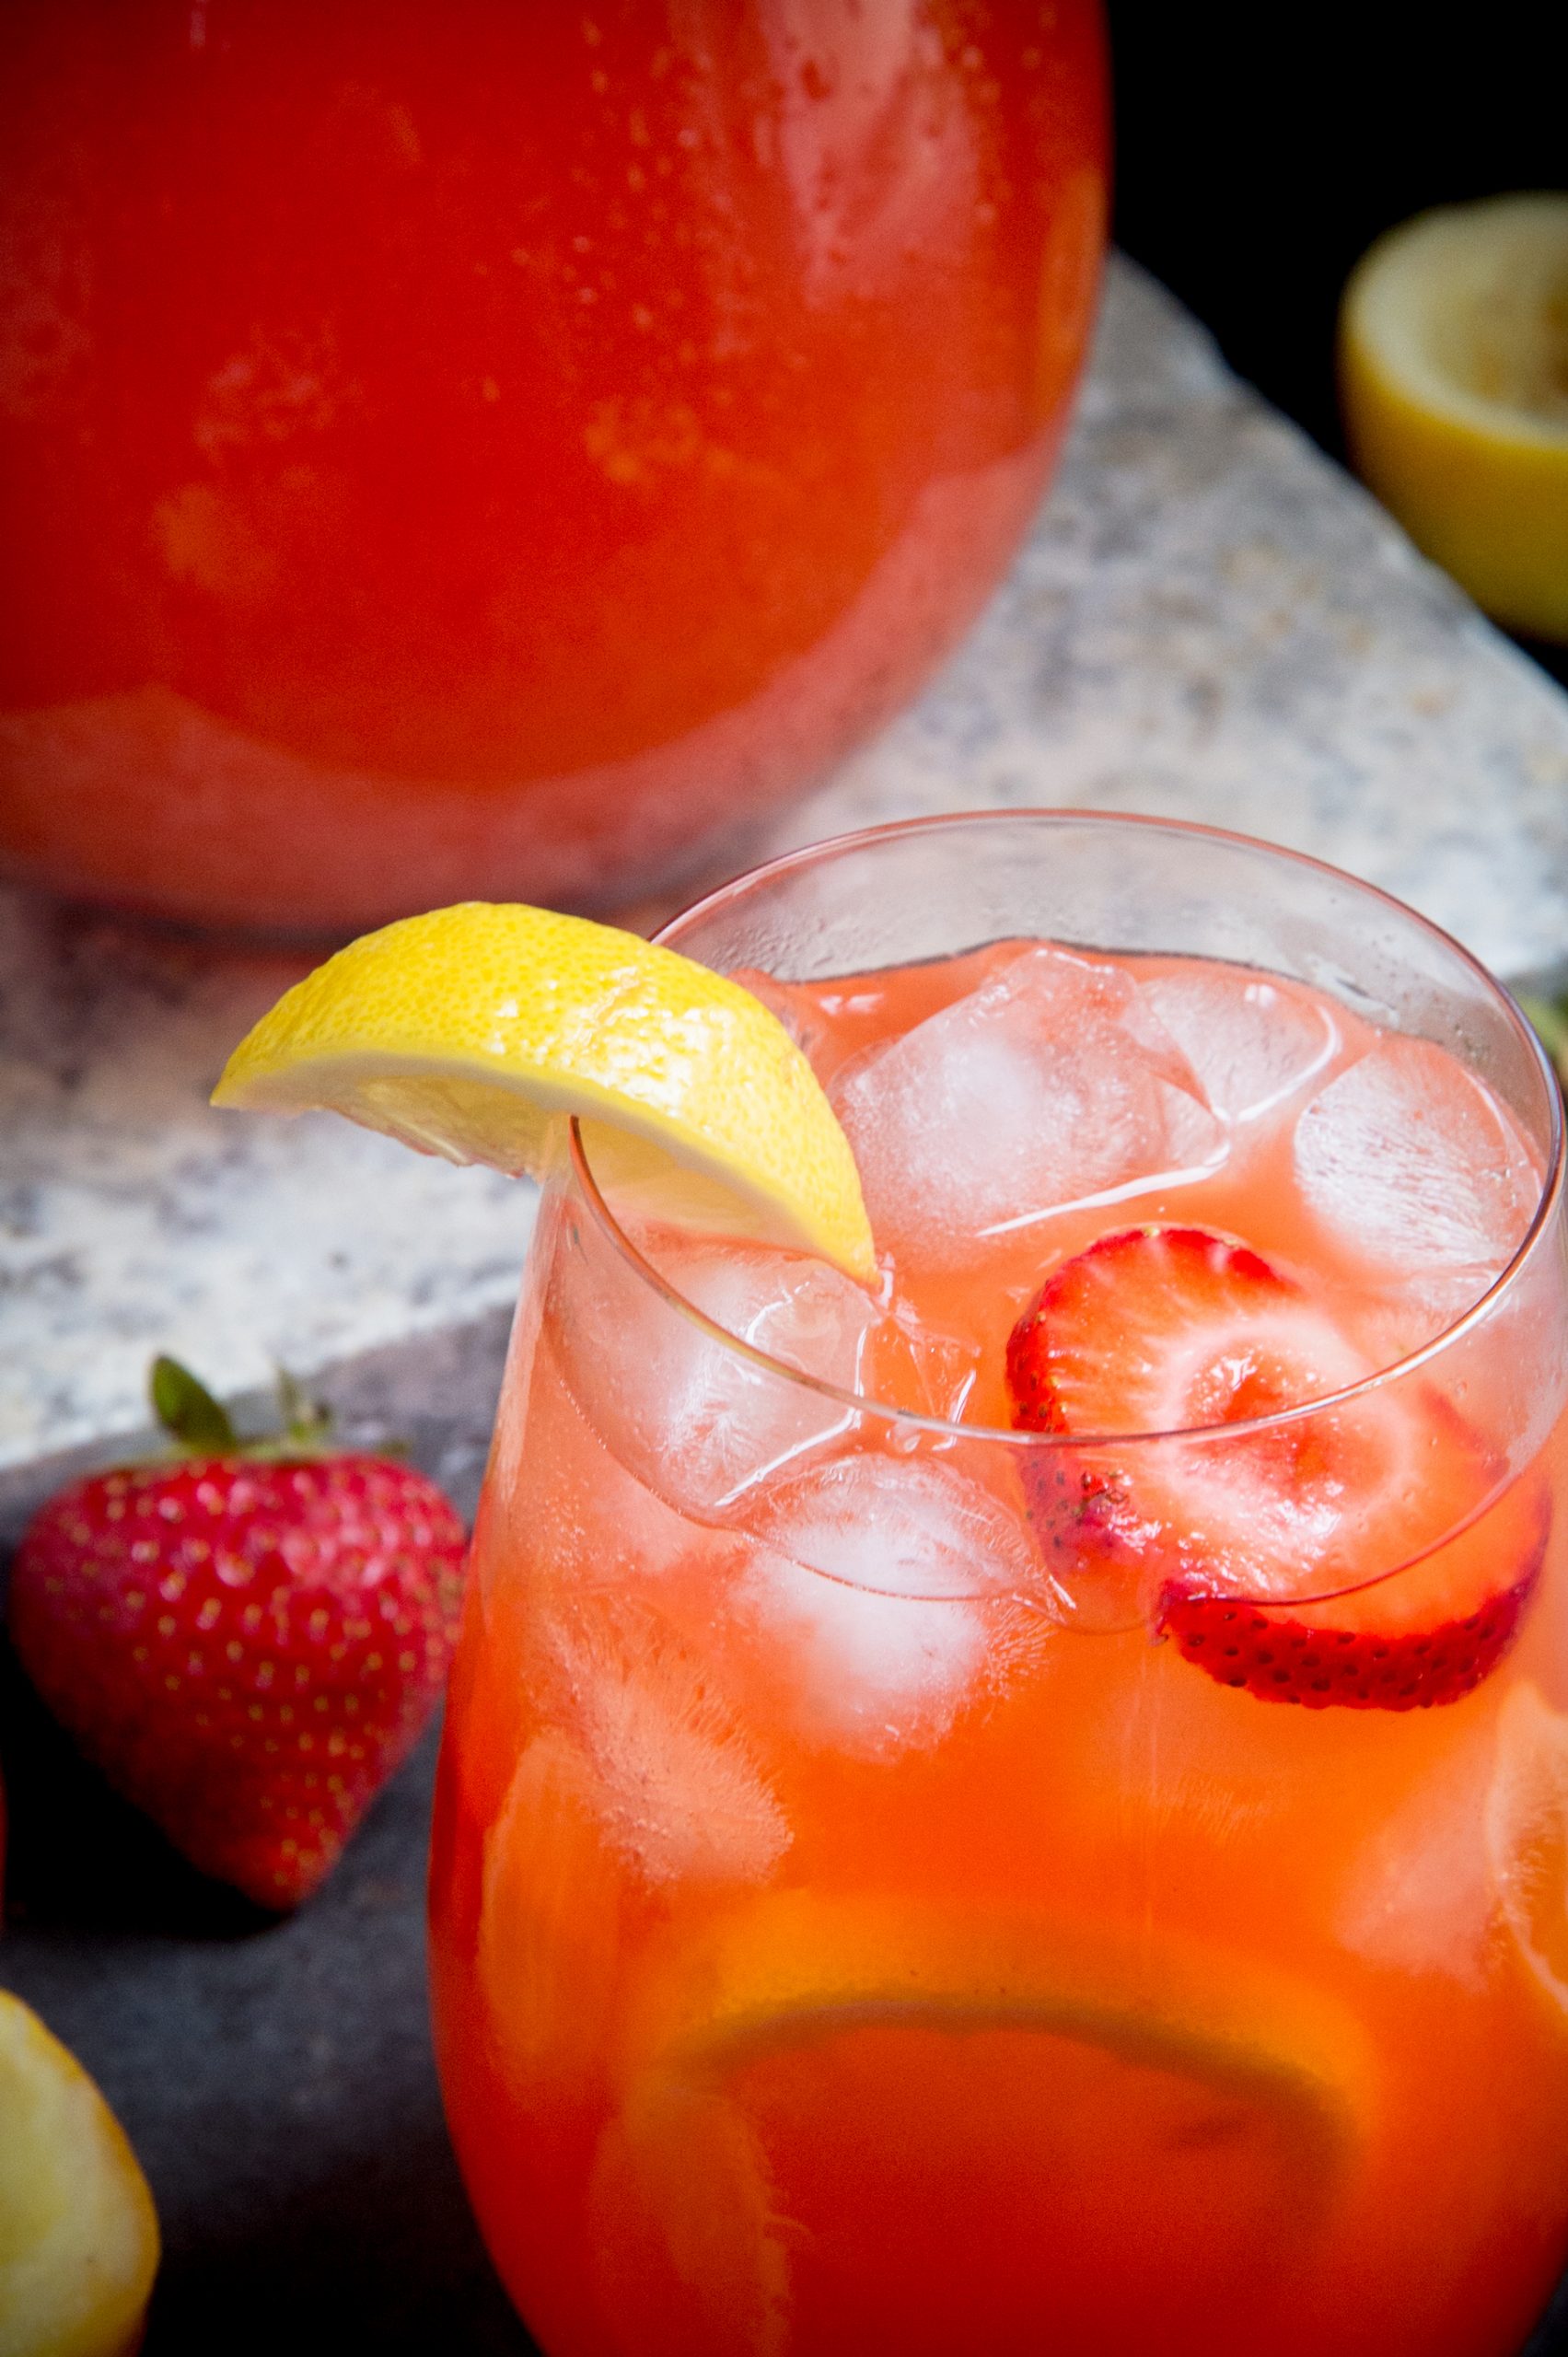 Glass of sugar-free strawberry lemonade in front of pitcher